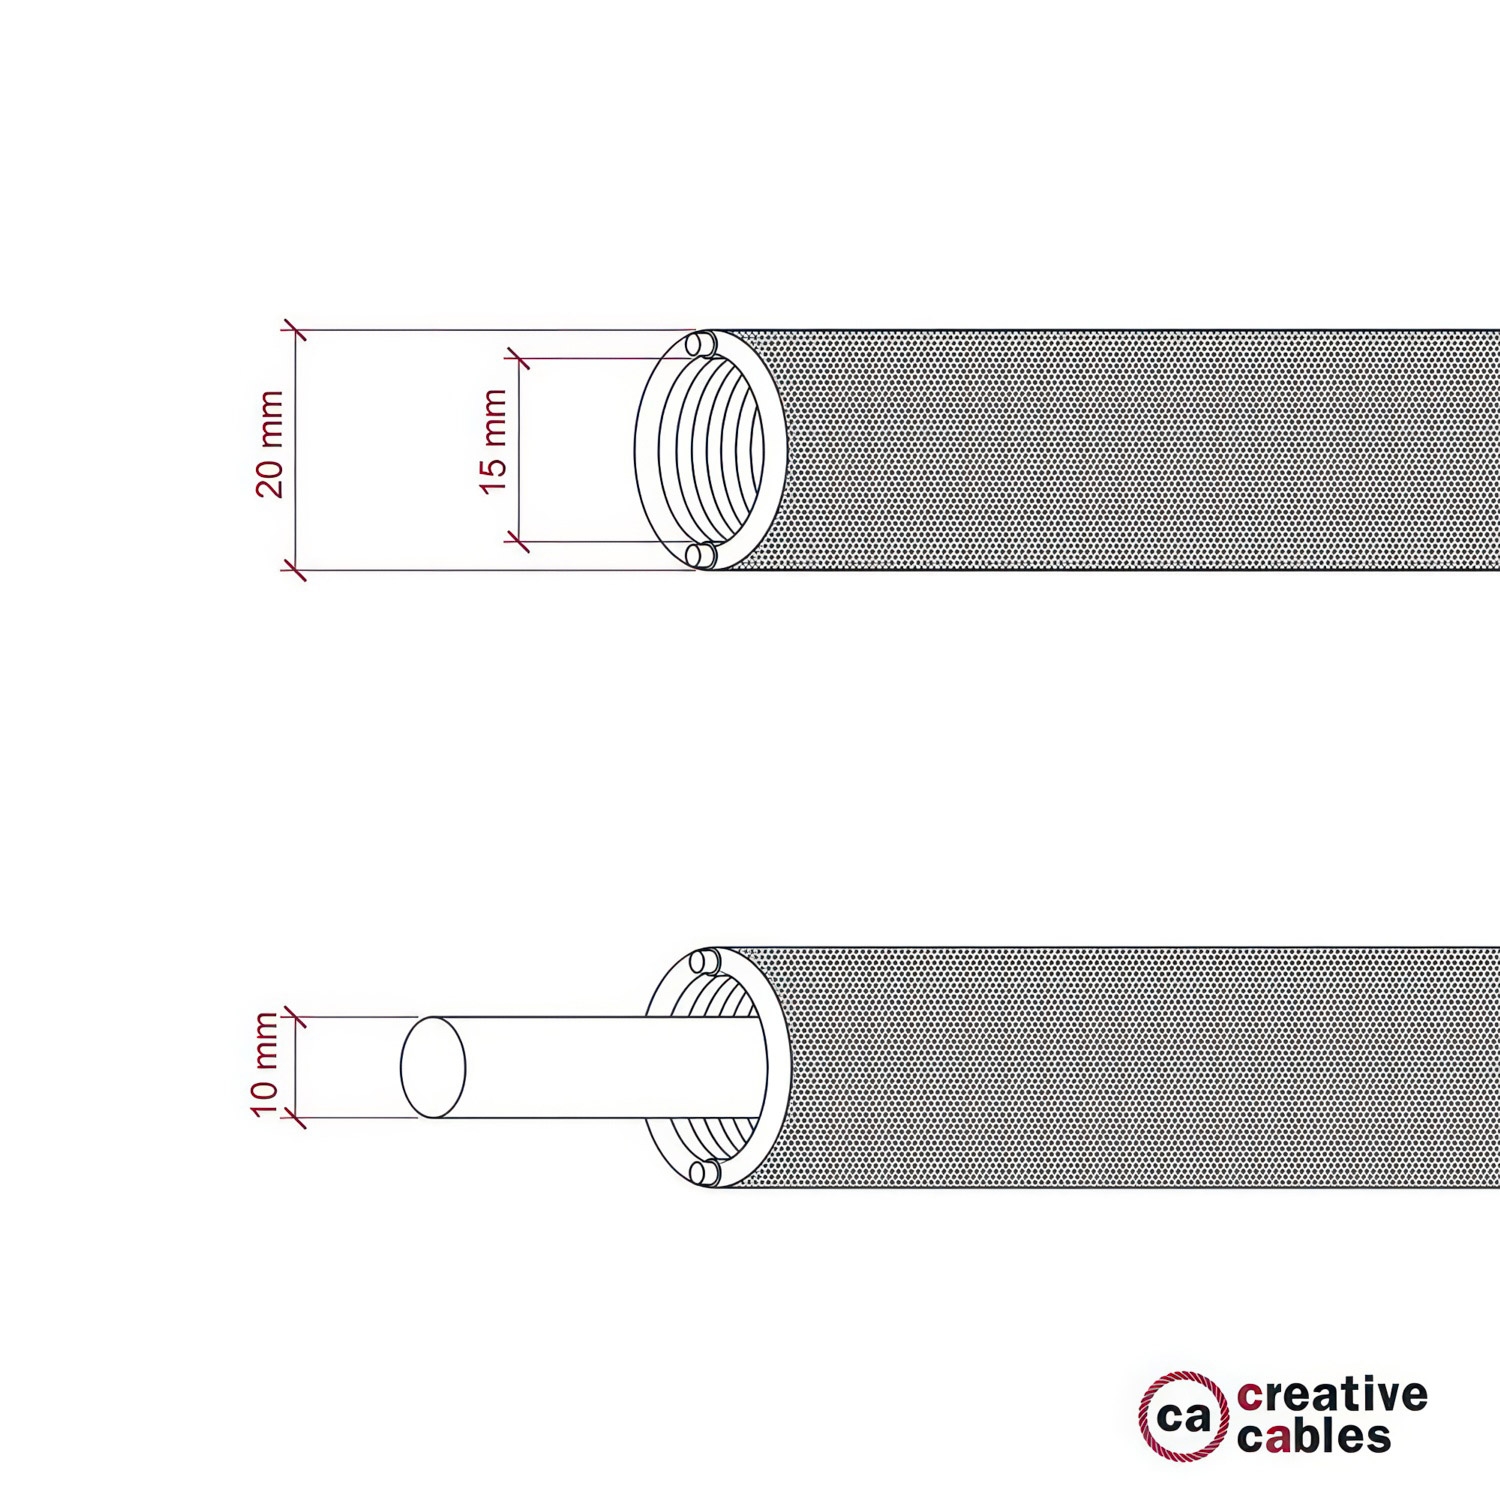 Creative-Tube flexible conduit, Red Rayon (RM09) fabric covering, 20 mm diameter